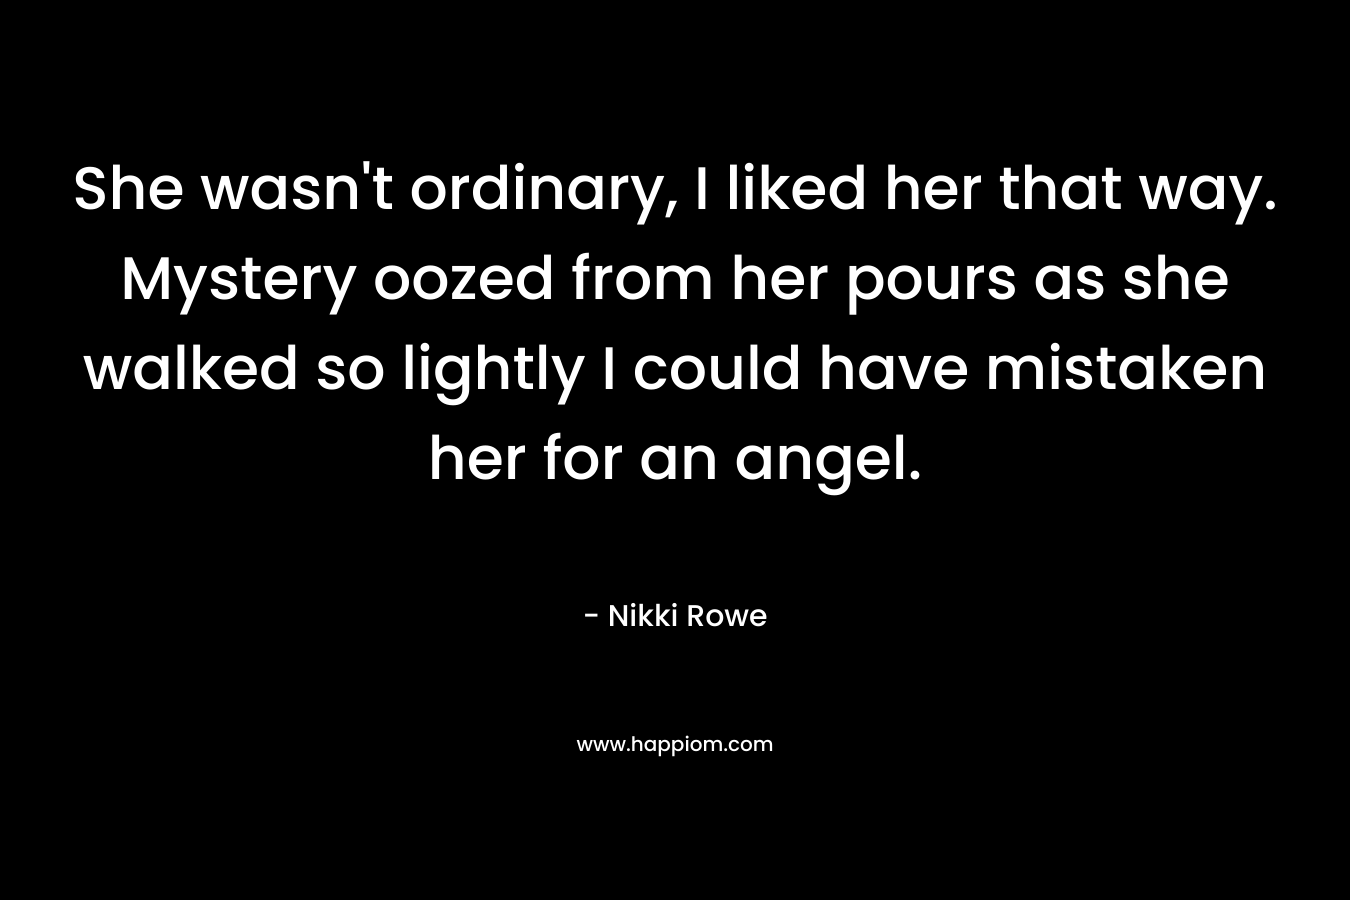 She wasn’t ordinary, I liked her that way. Mystery oozed from her pours as she walked so lightly I could have mistaken her for an angel. – Nikki Rowe